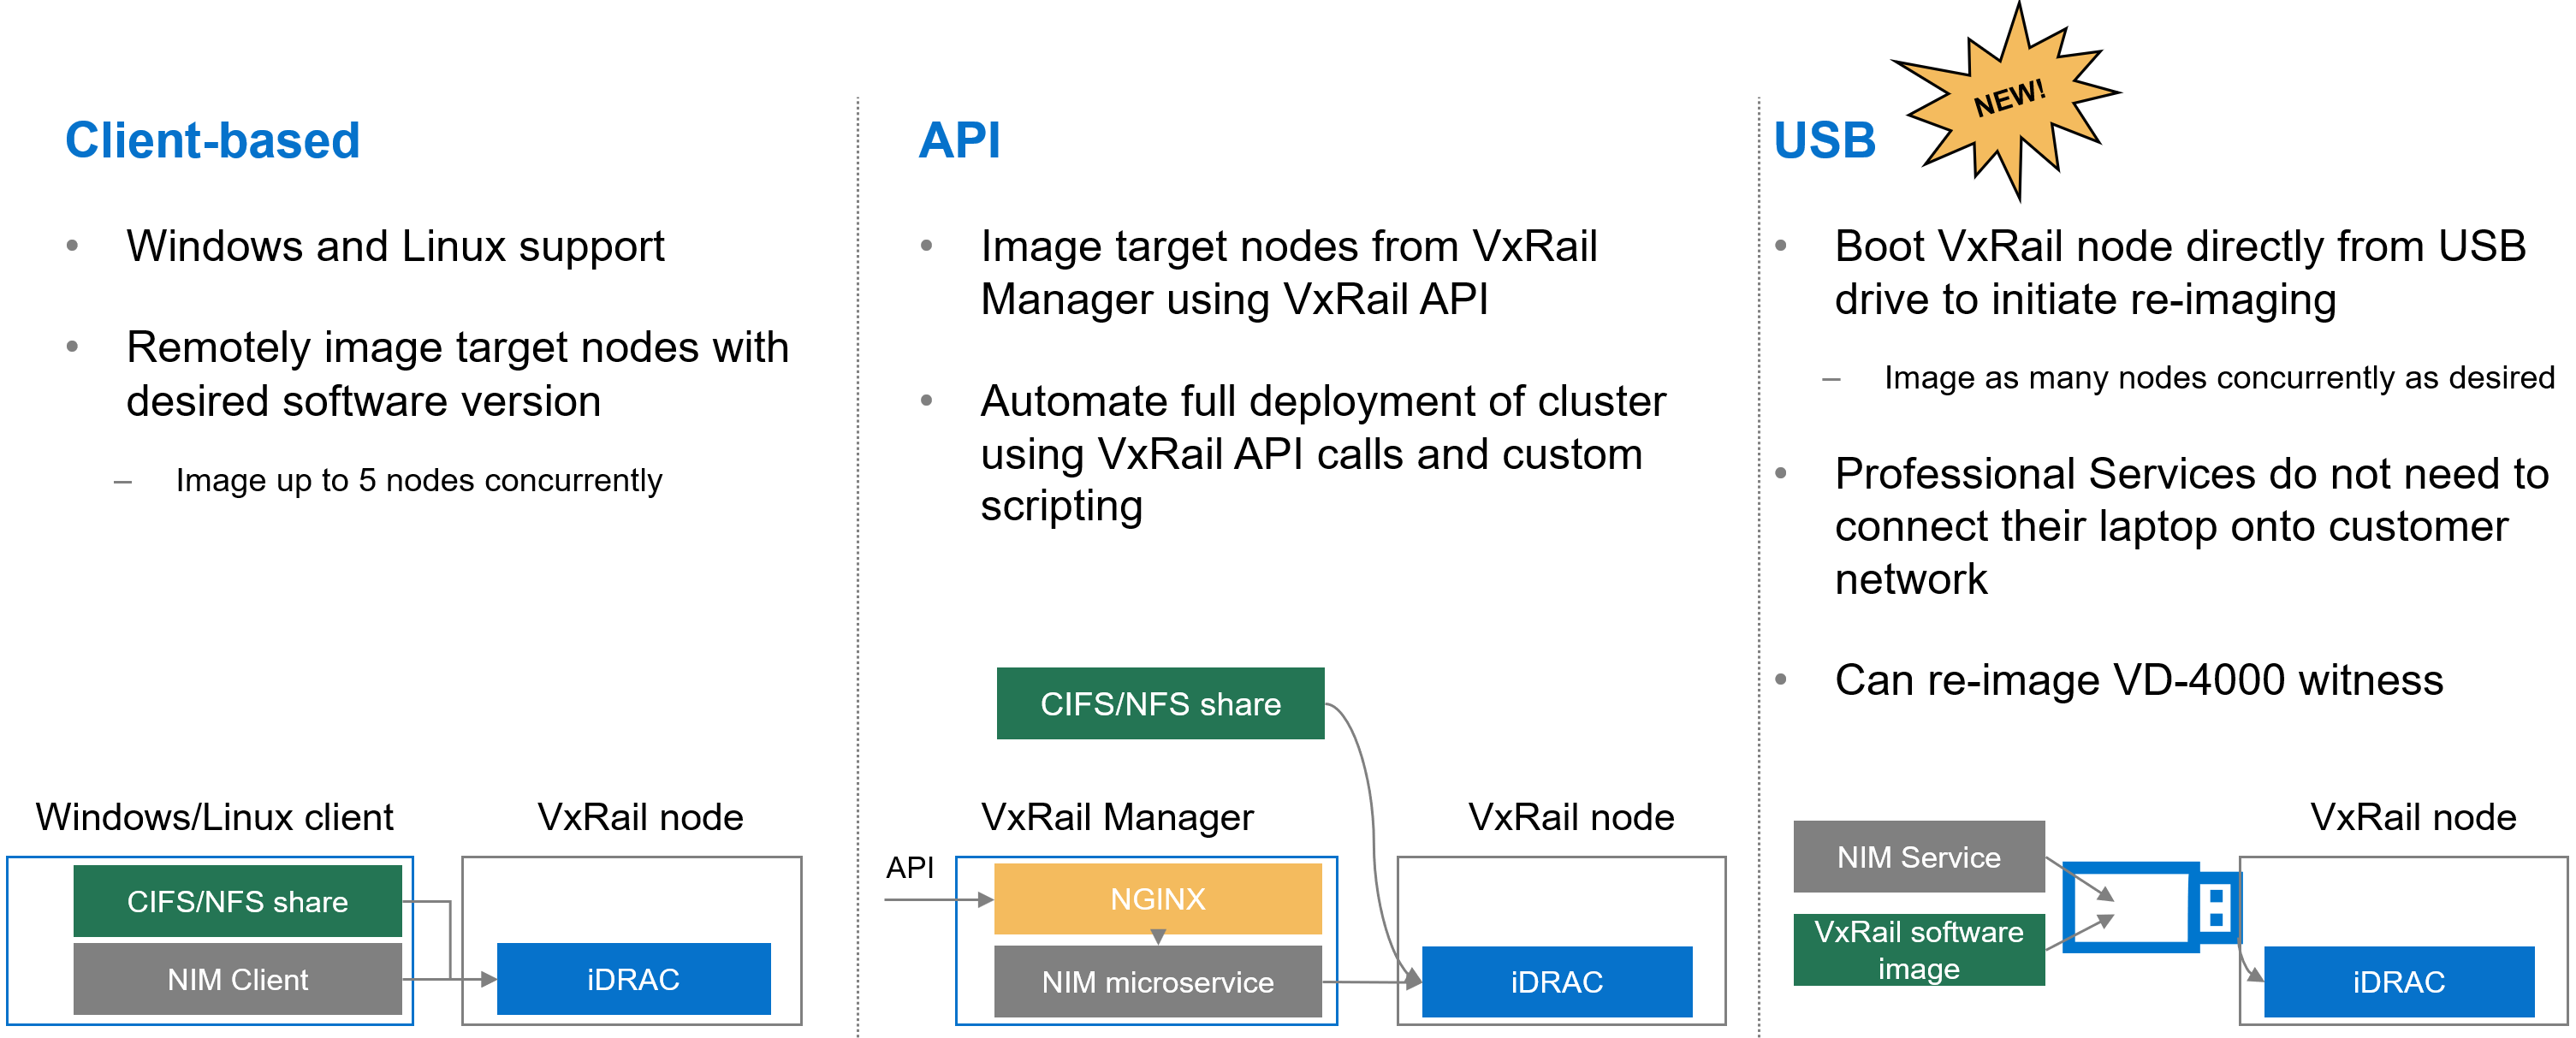 This illustrates different options to use the node image management tool  Client-based: Windows and linux support. Remotely image target nodes with desired software version up to 5 nodes concurrently.  API: Image target notes for VxRail Manager using VxRail API. Automate full deployment of clustter using VxRail API calls and custom scripting.   USB (NEW): Boot VxRail node directly from USB drive to initiate re-imaging (image as many nodes concurrently as desired). Professional services do not need to connect their laptop onto customer network. Can re-image VD-4000 witness.